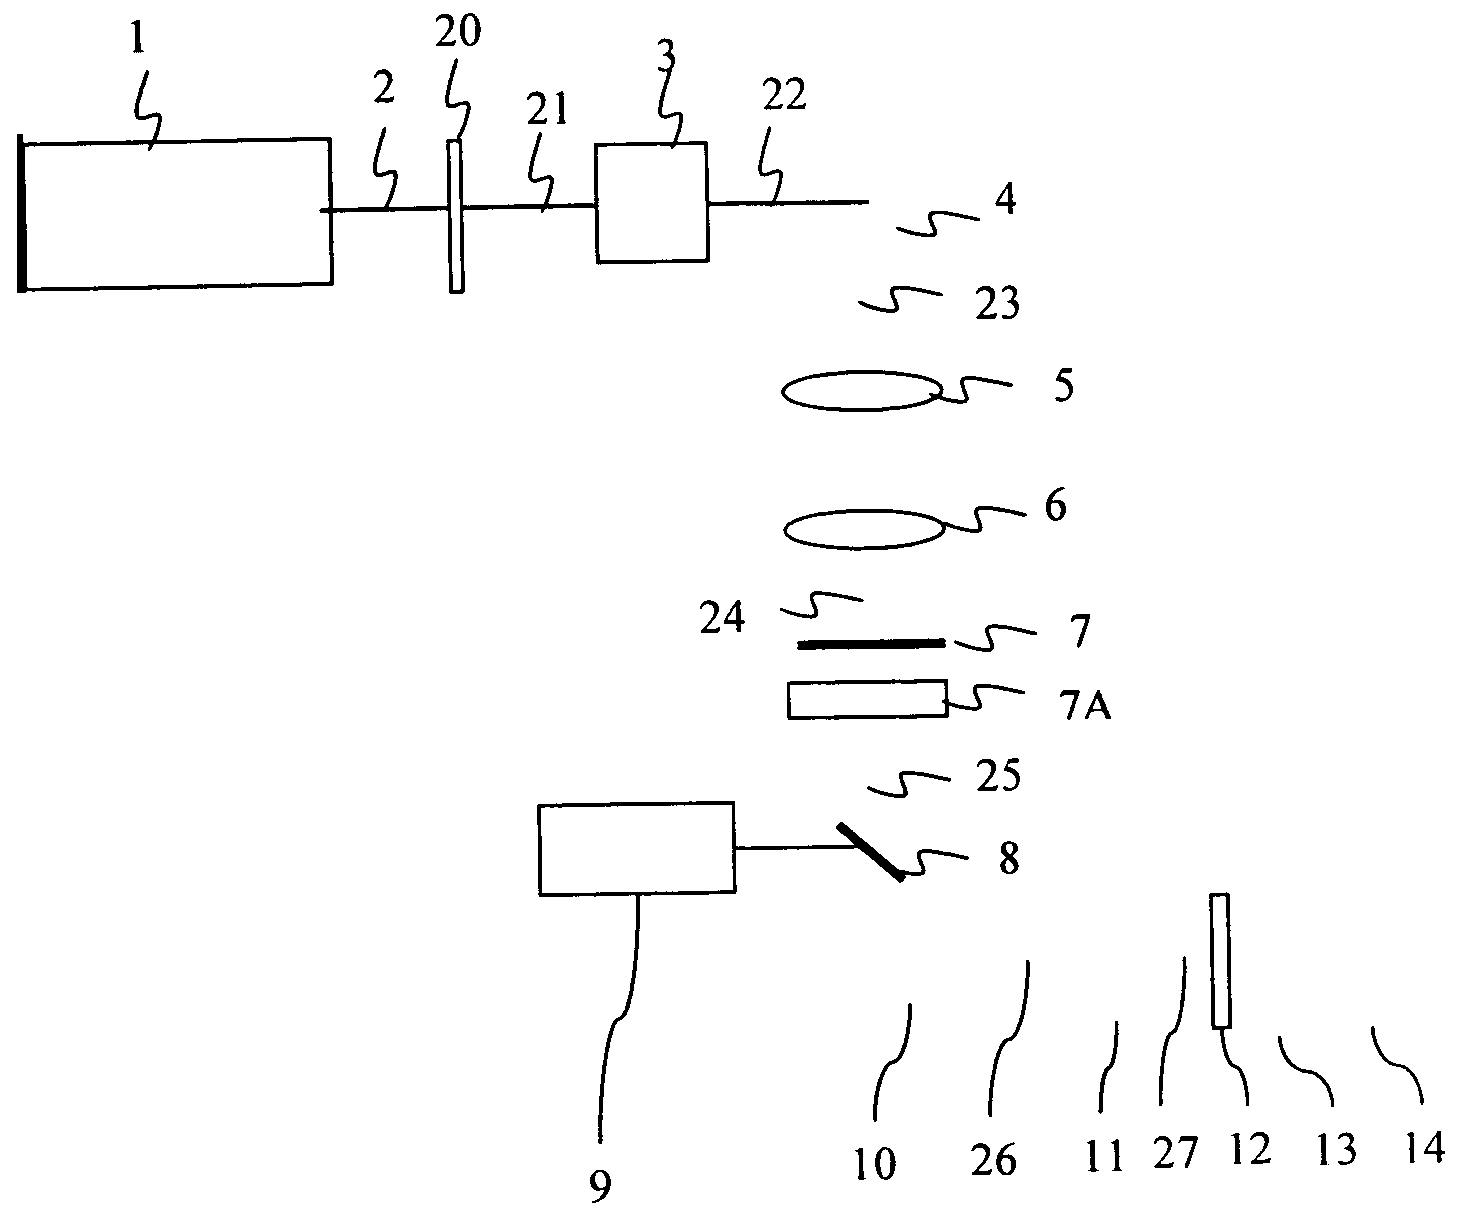 Method and apparatus for laser trimming of resistors using ultrafast laser pulse from ultrafast laser oscillator operating in picosecond and femtosecond pulse widths